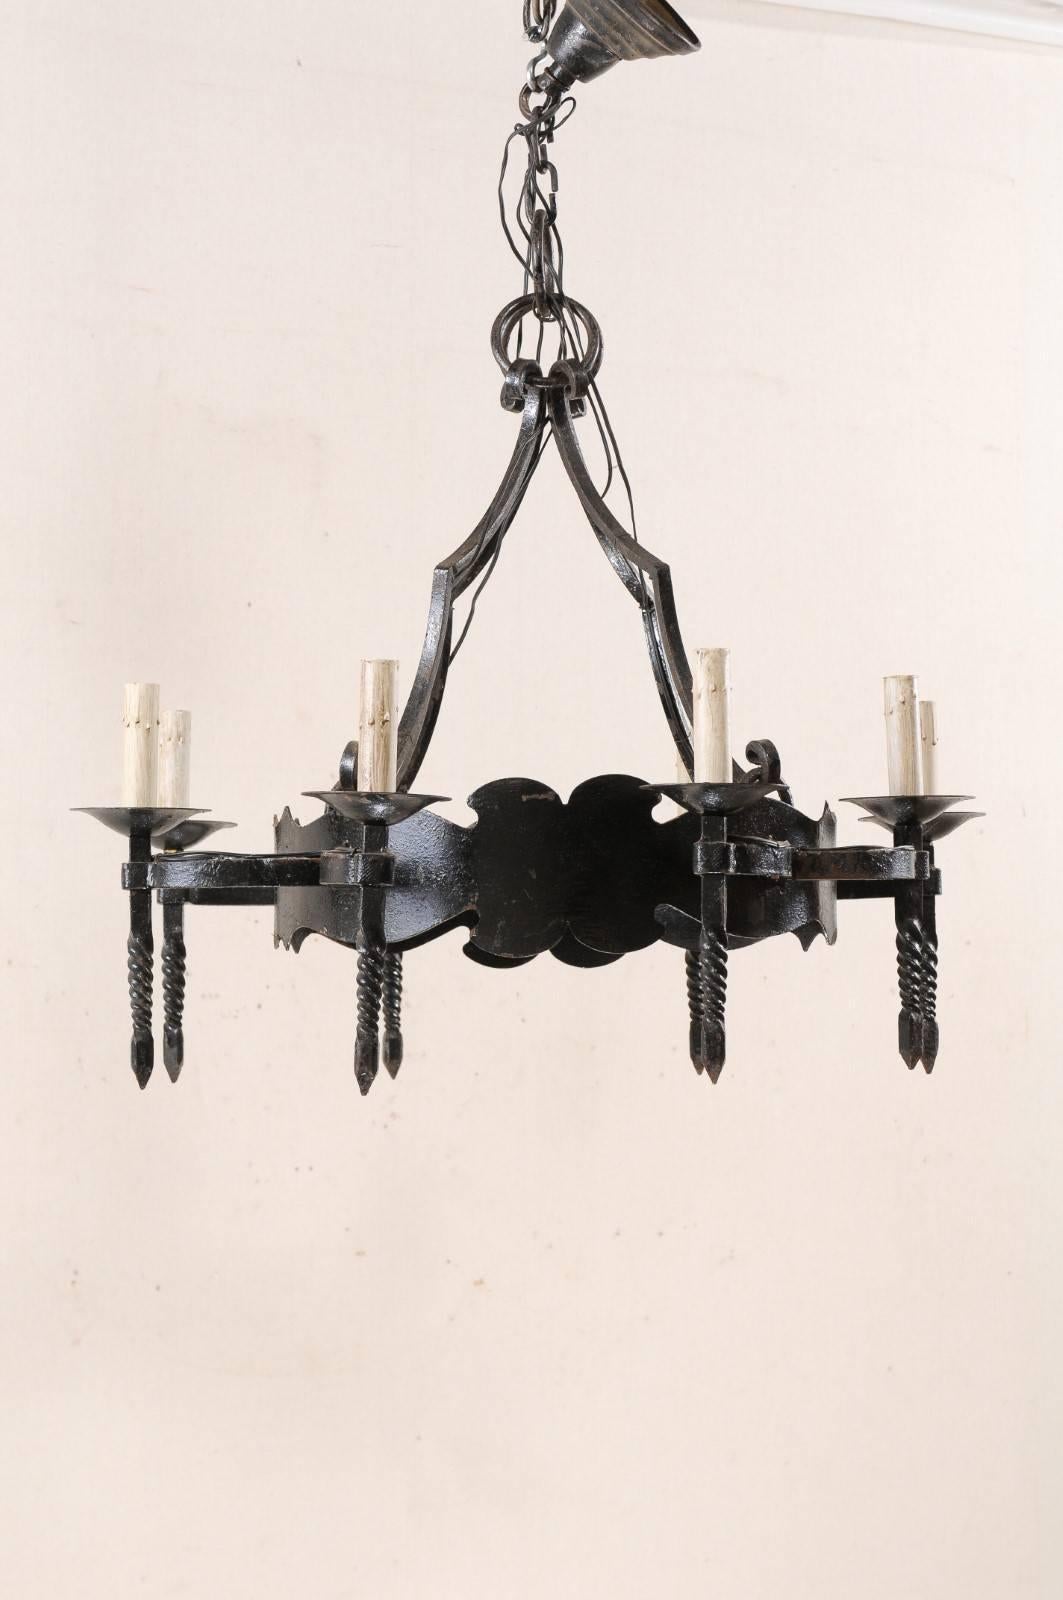 Forged French Mid-20th Century Iron Ring Chandelier with Eight Torch-Shaped Lights For Sale